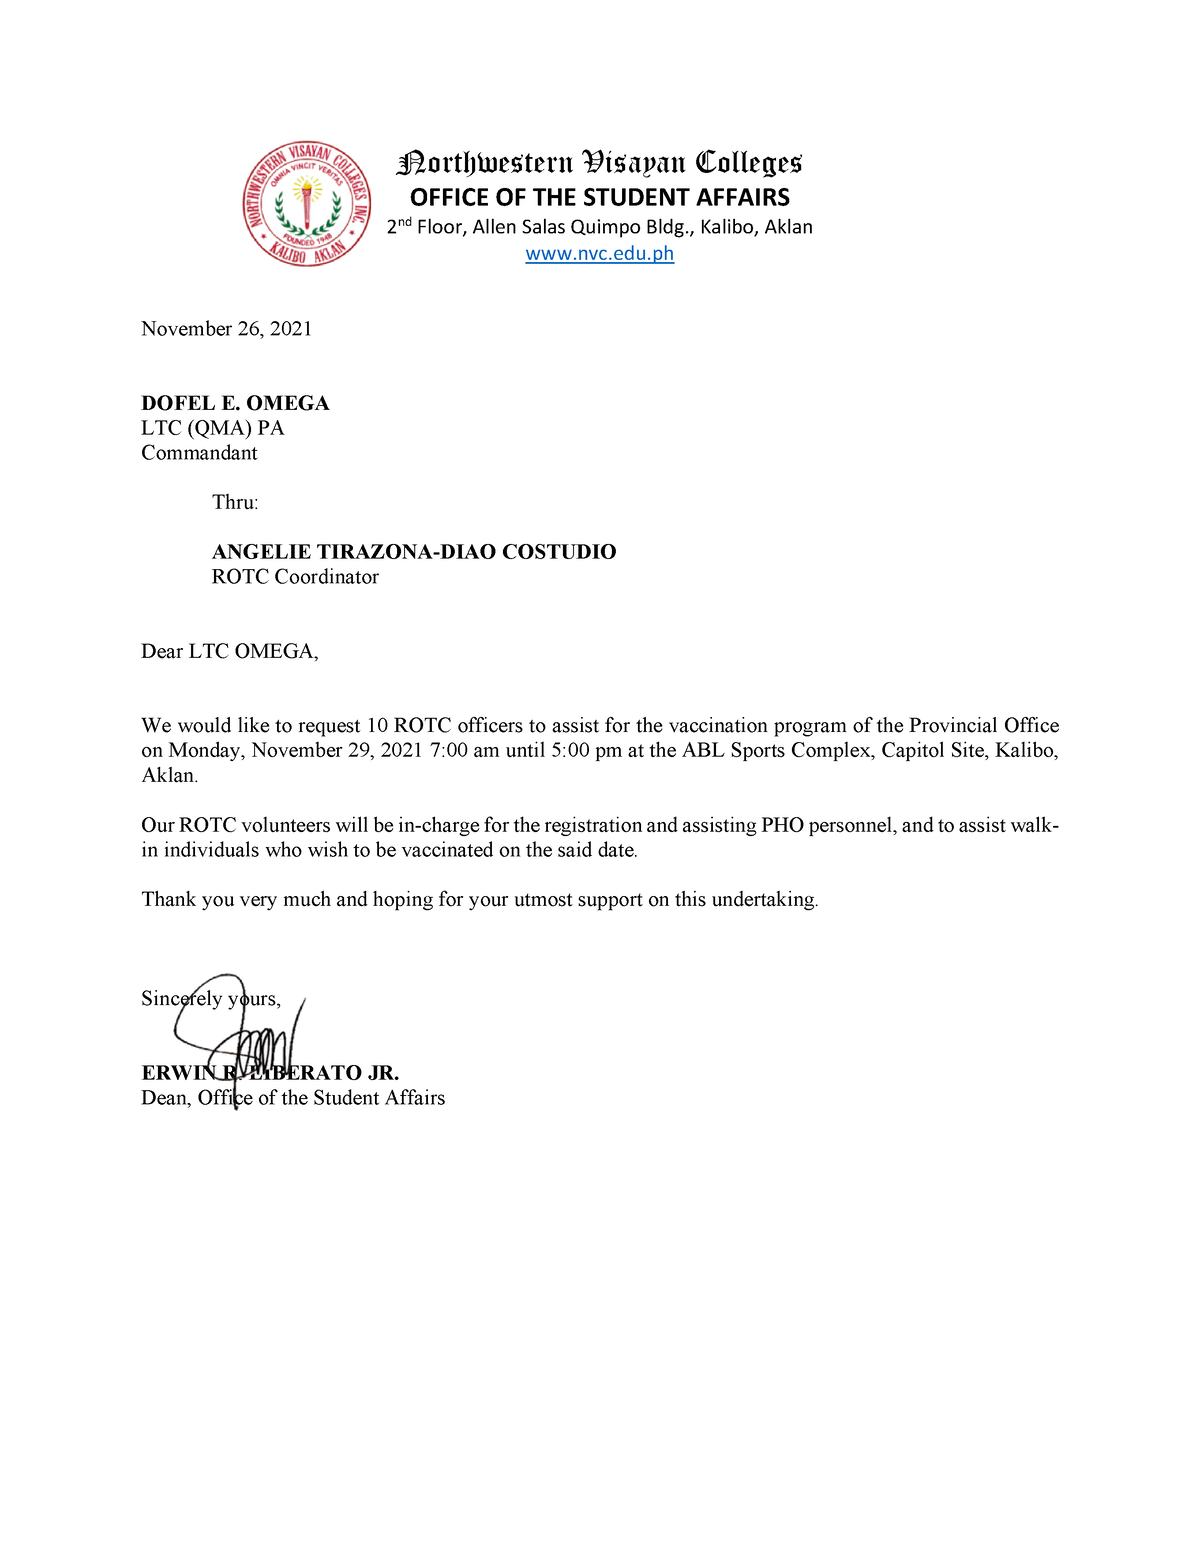 example of application letter for rotc officer